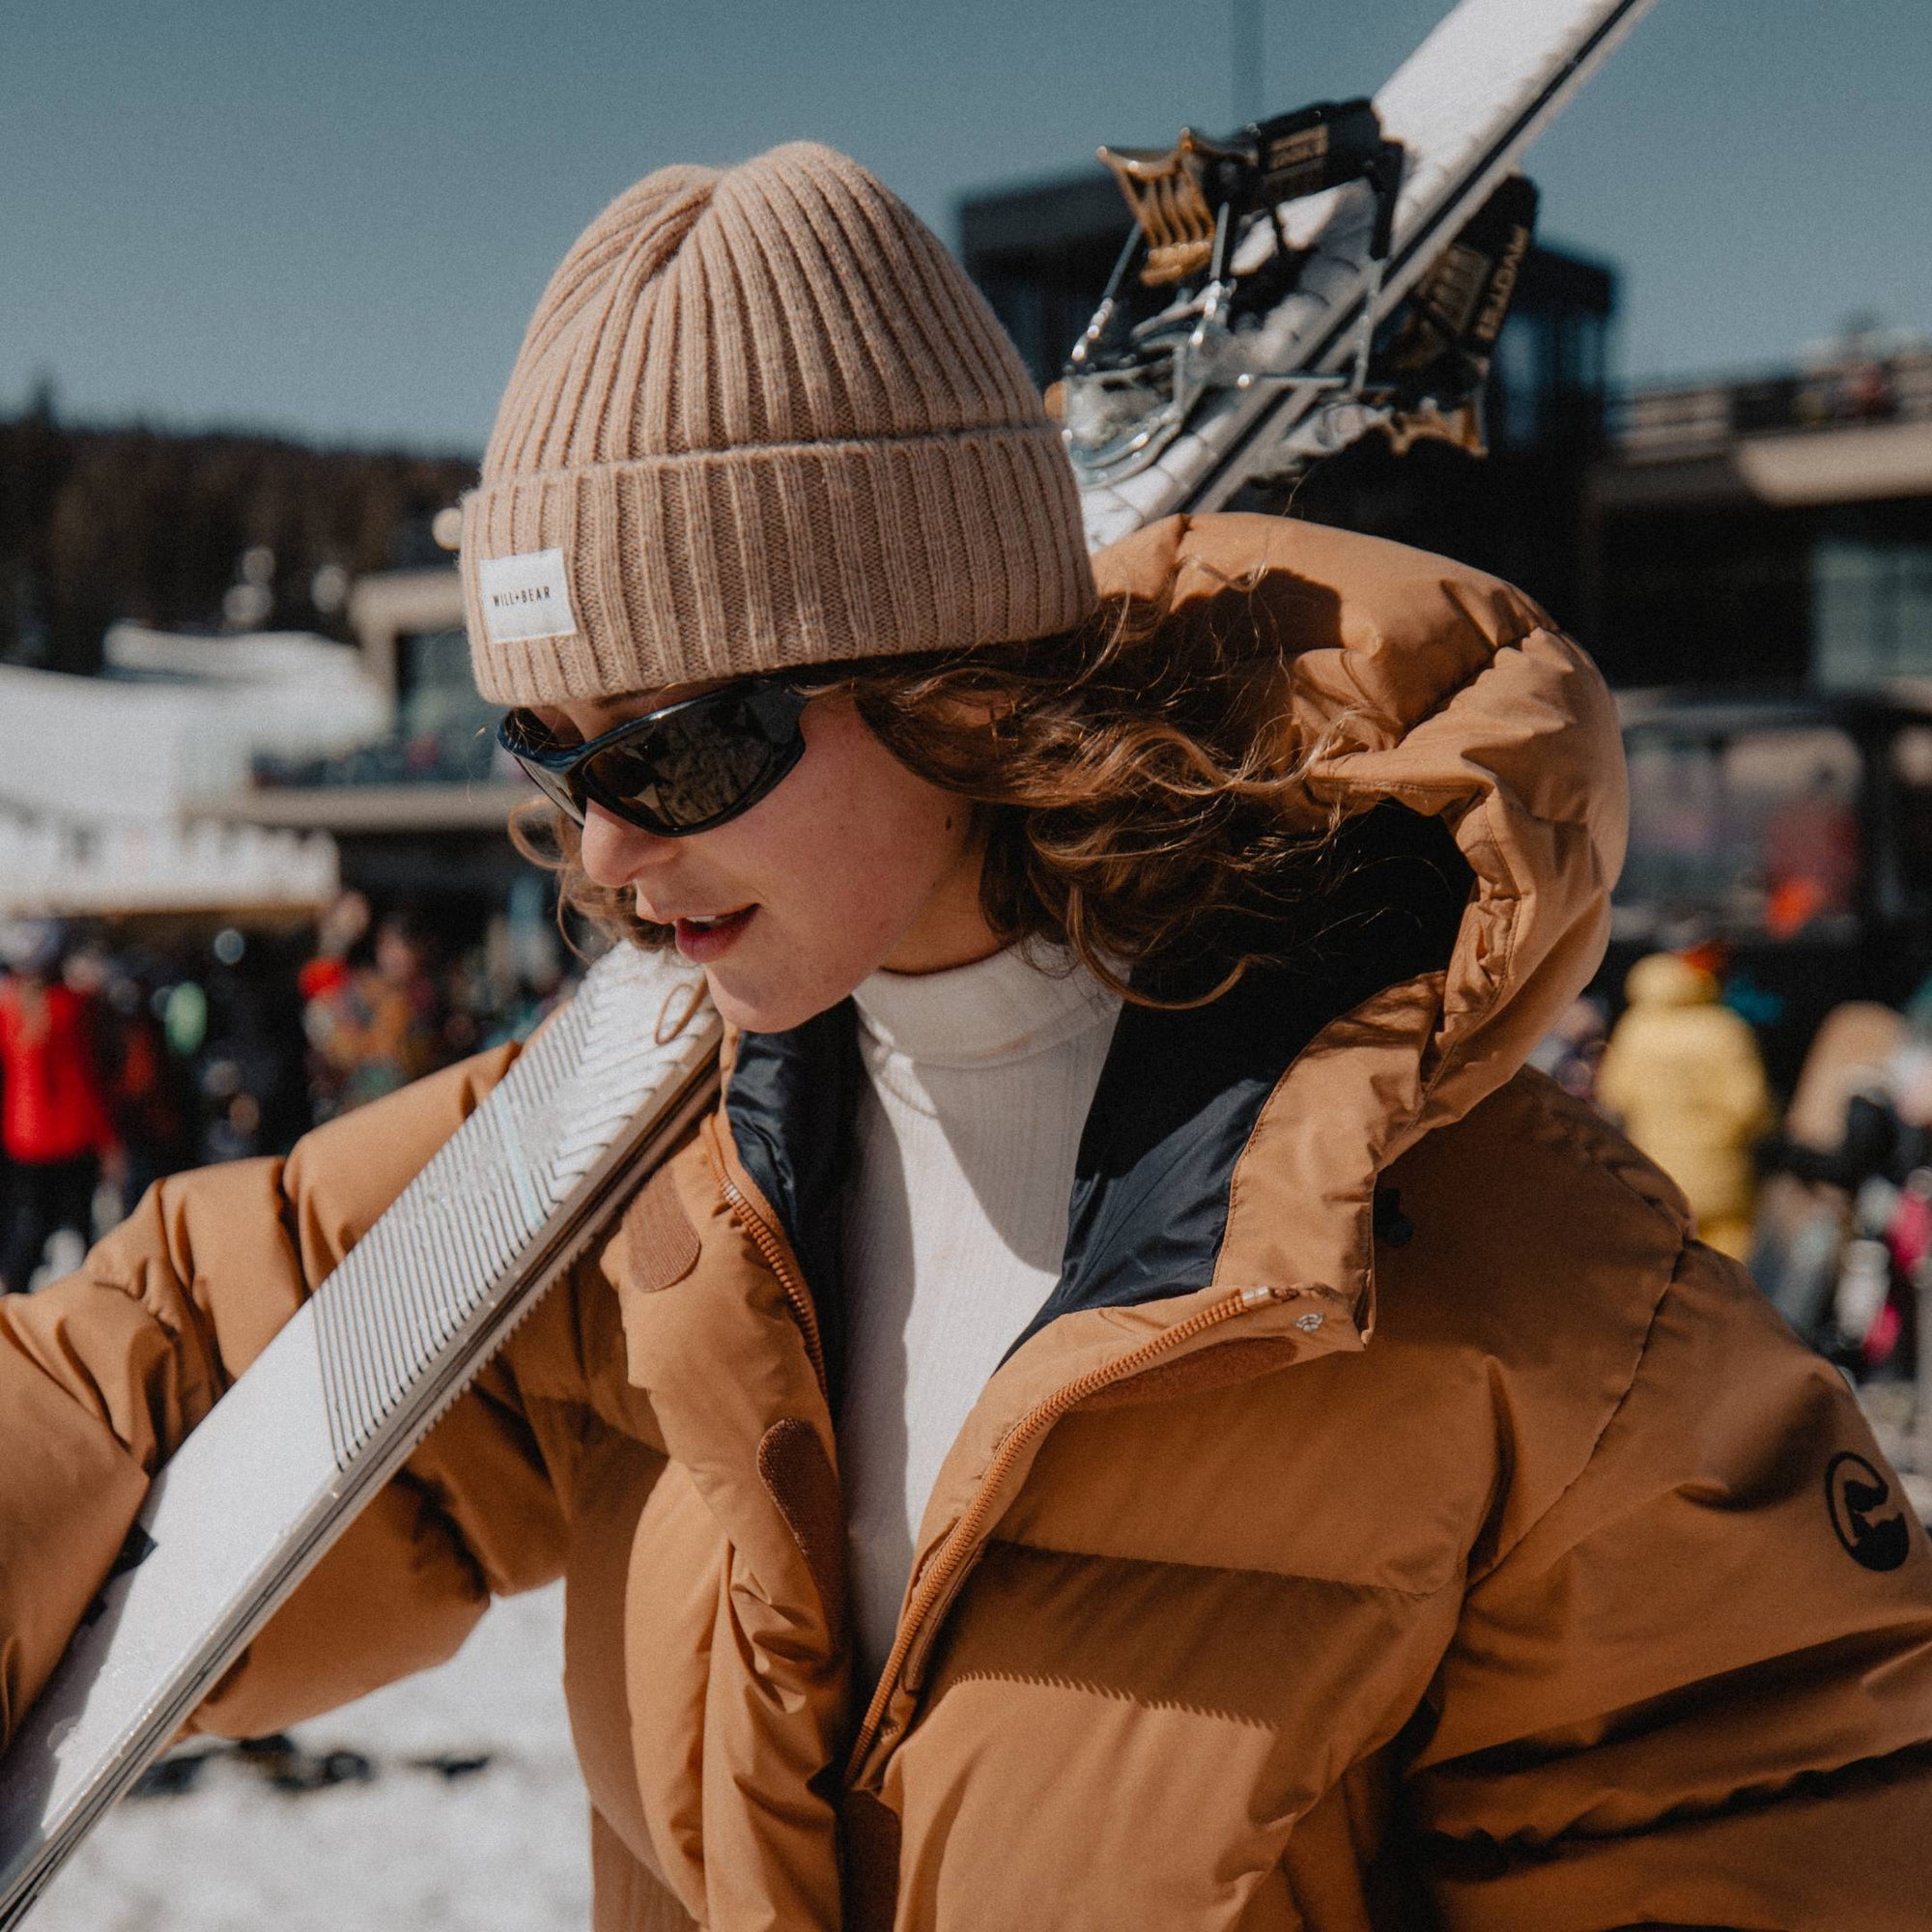 Woman with long, curly hair wearing beanie at ski slopes